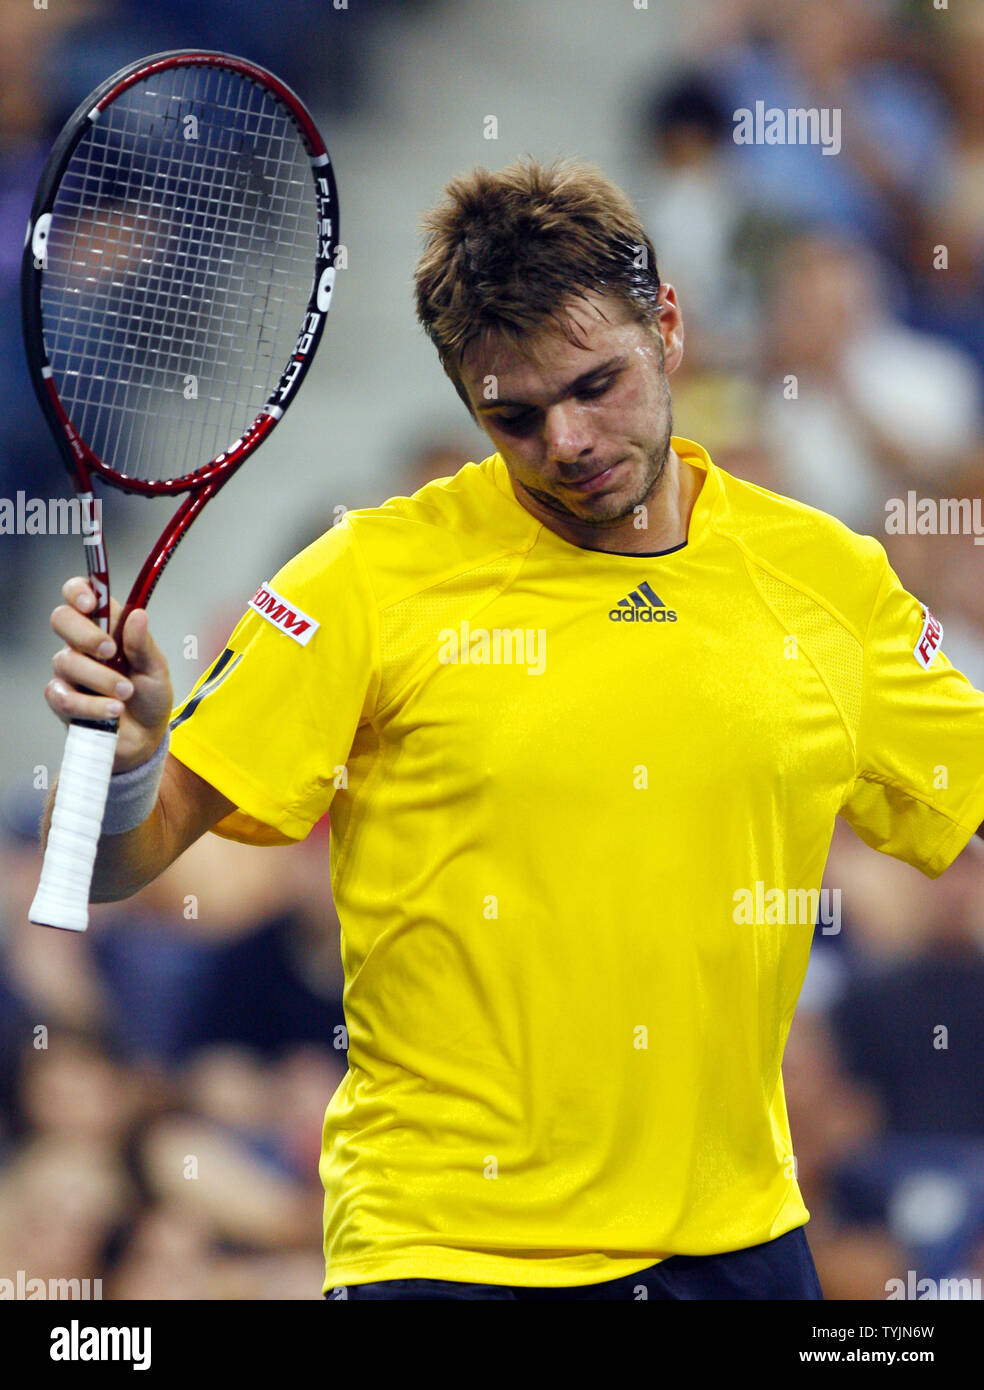 Stanislas Wawrinka reacts after losing a point in his match against Andy  Murray on day eight at the U.S. Open Tennis Championships at the U.S.  National Tennis Center in Flushing Meadows, New